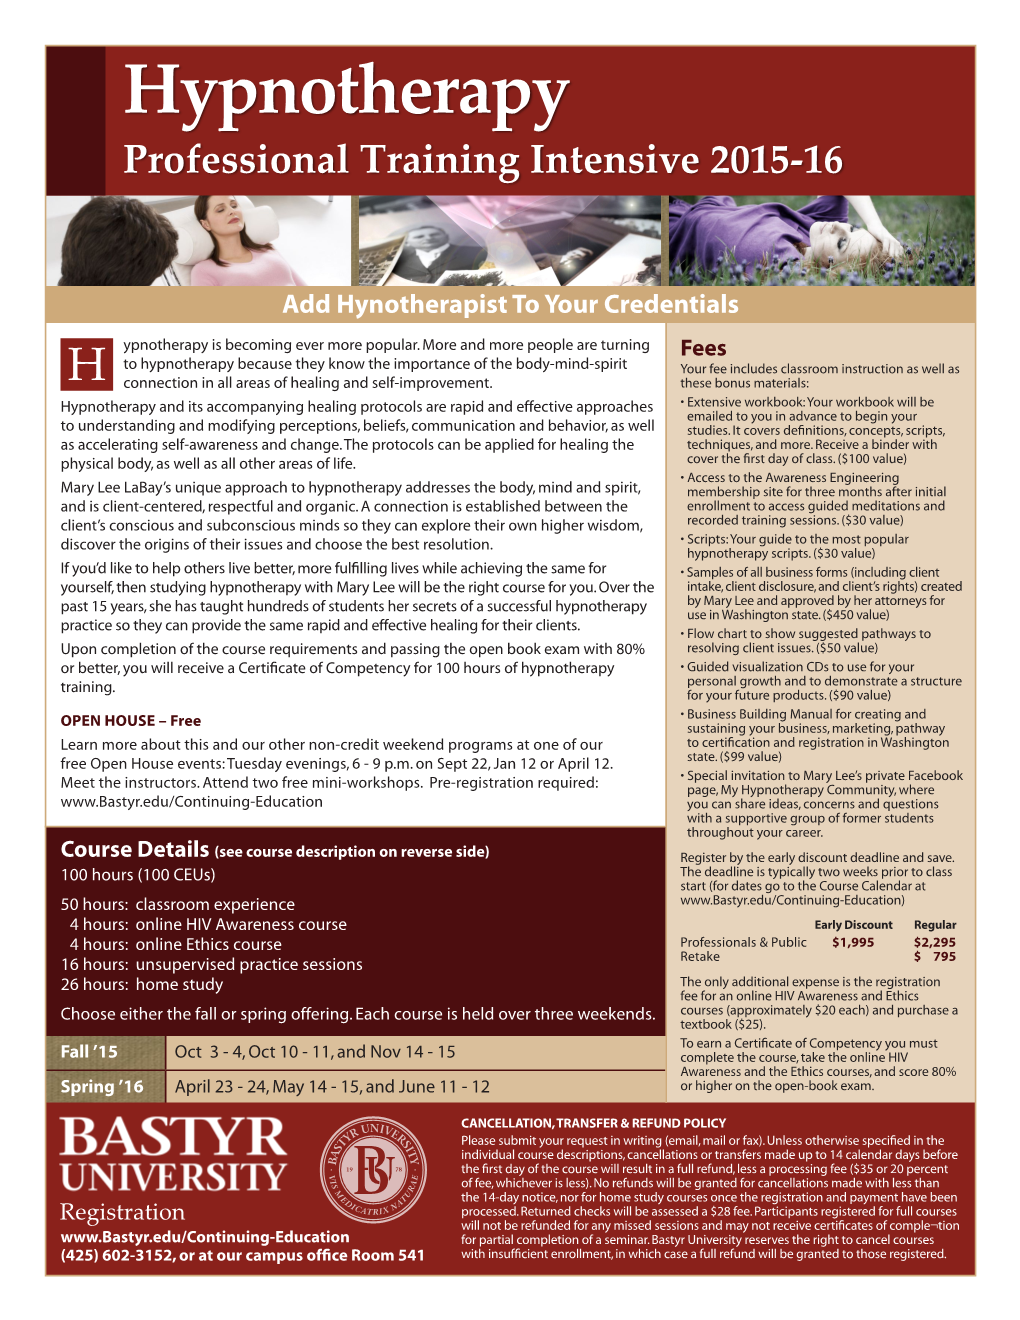 Hypnotherapy Professional Training Intensive 2015-16